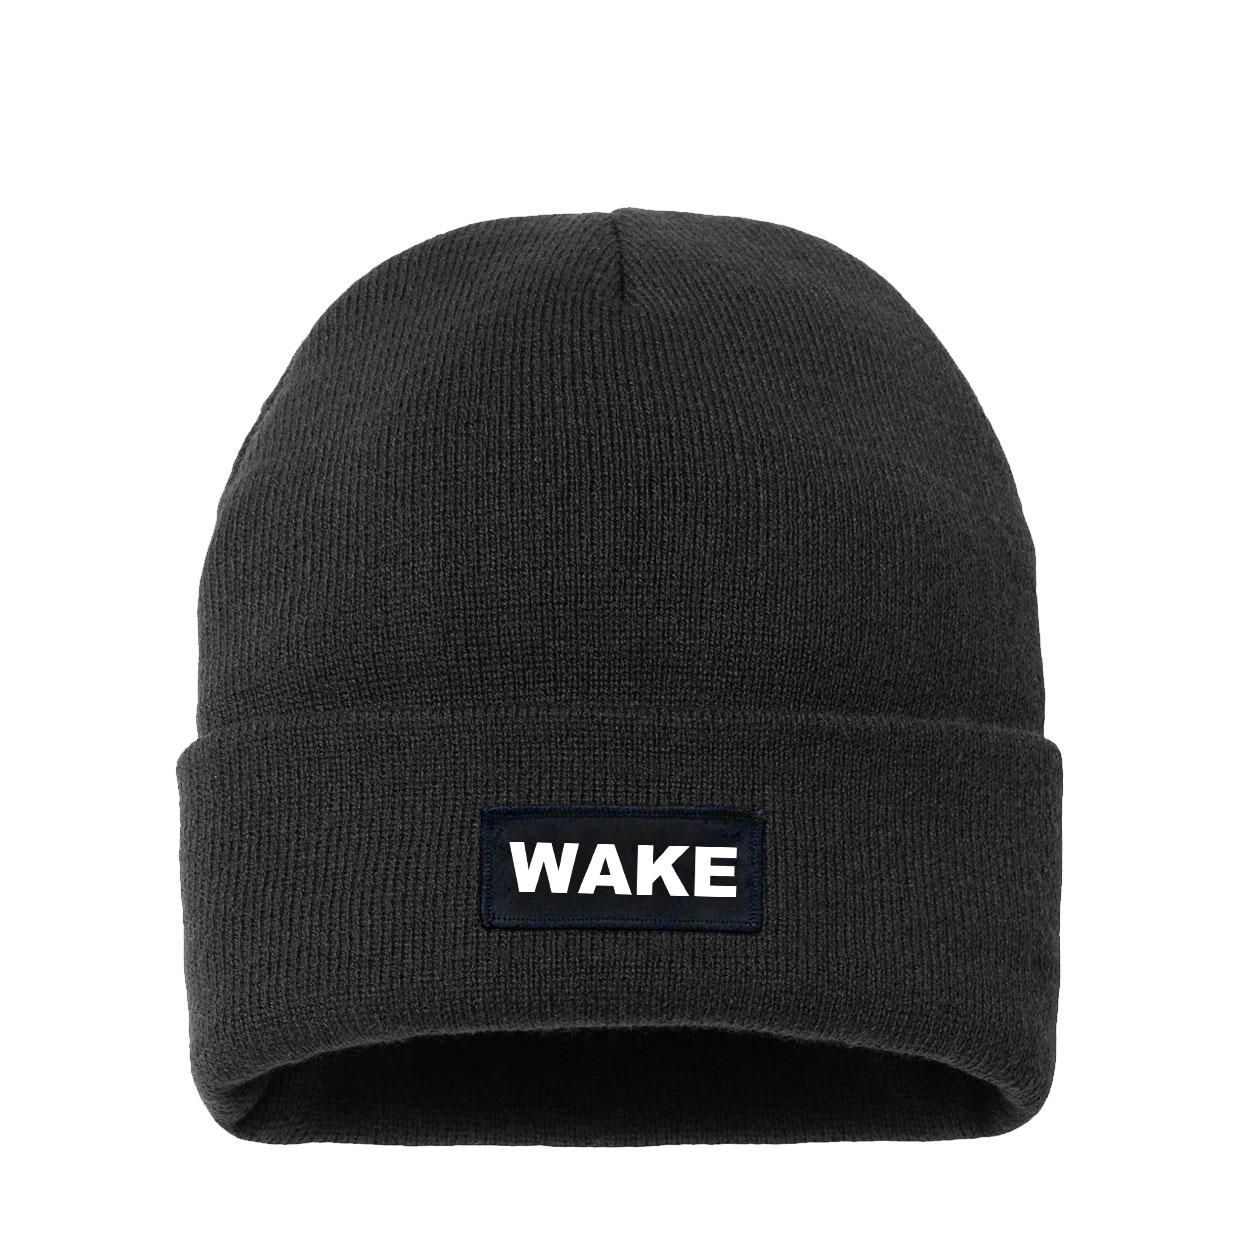 Wake Brand Logo Night Out Woven Patch Night Out Sherpa Lined Cuffed Beanie Black